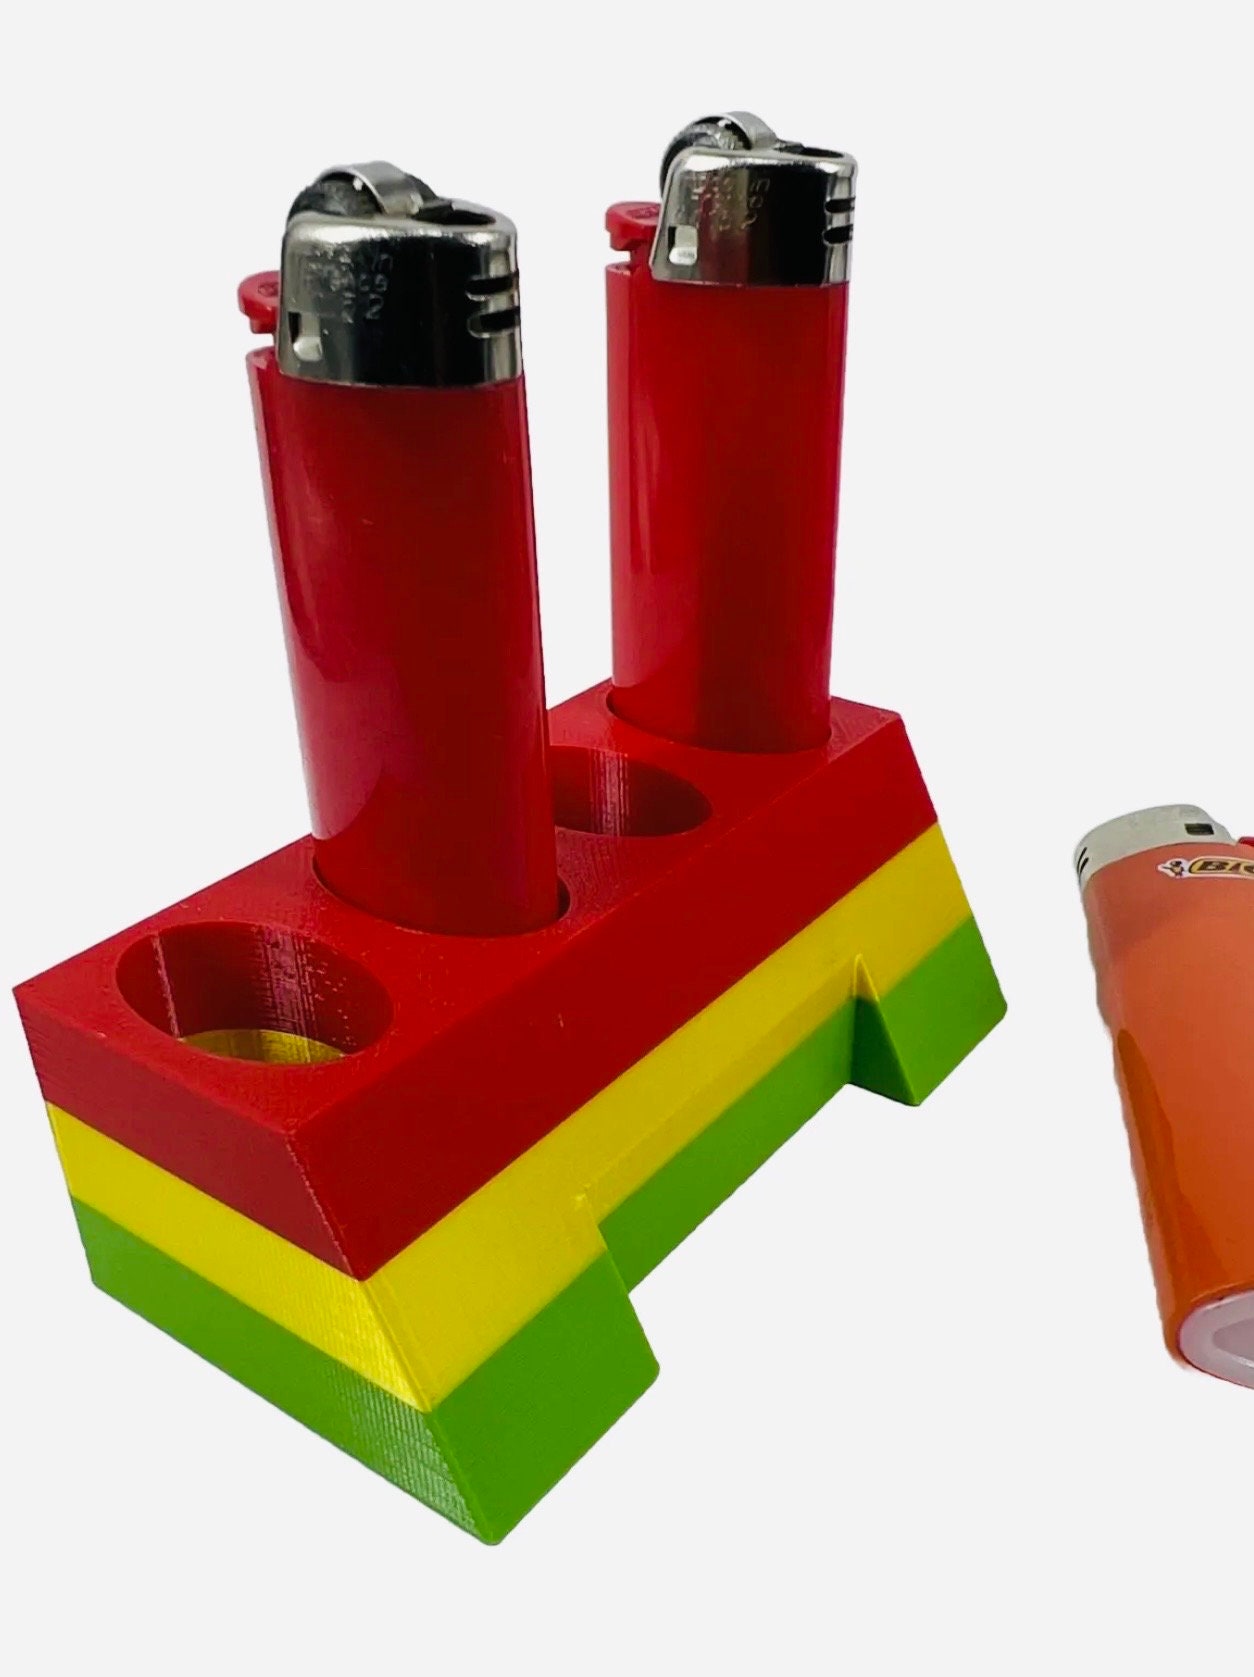 This Can Koozie Has Pockets To Hold Your Lighter and Two Joints